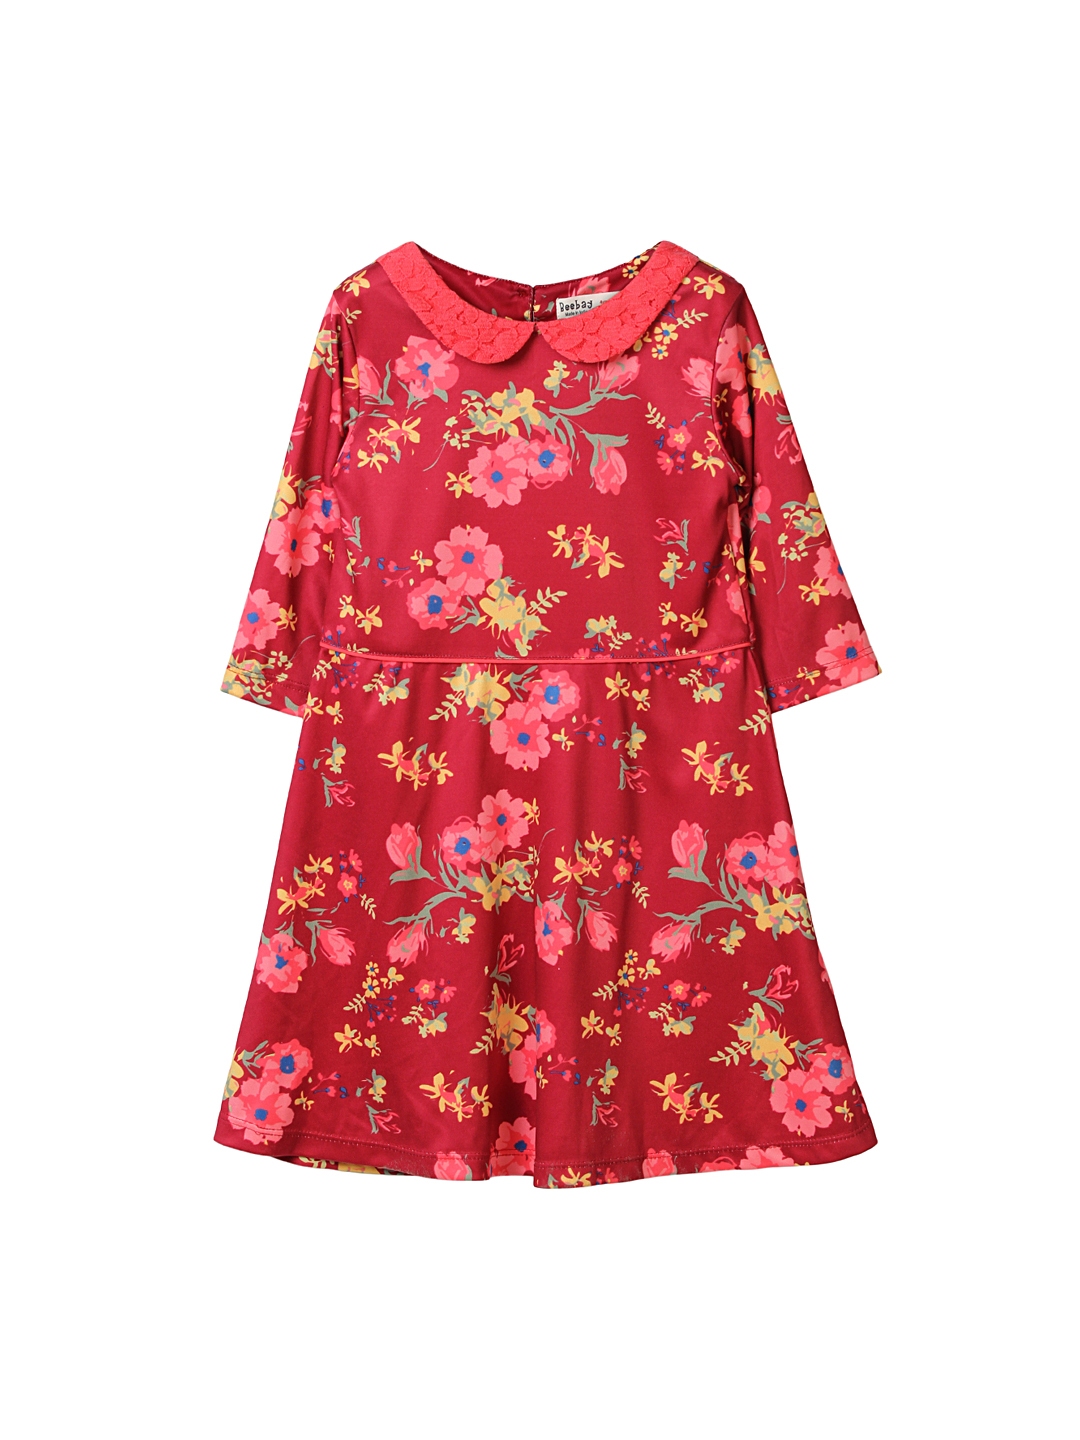 Buy Be Girls Red Printed A Line Dress - Dresses for Girls 1080263